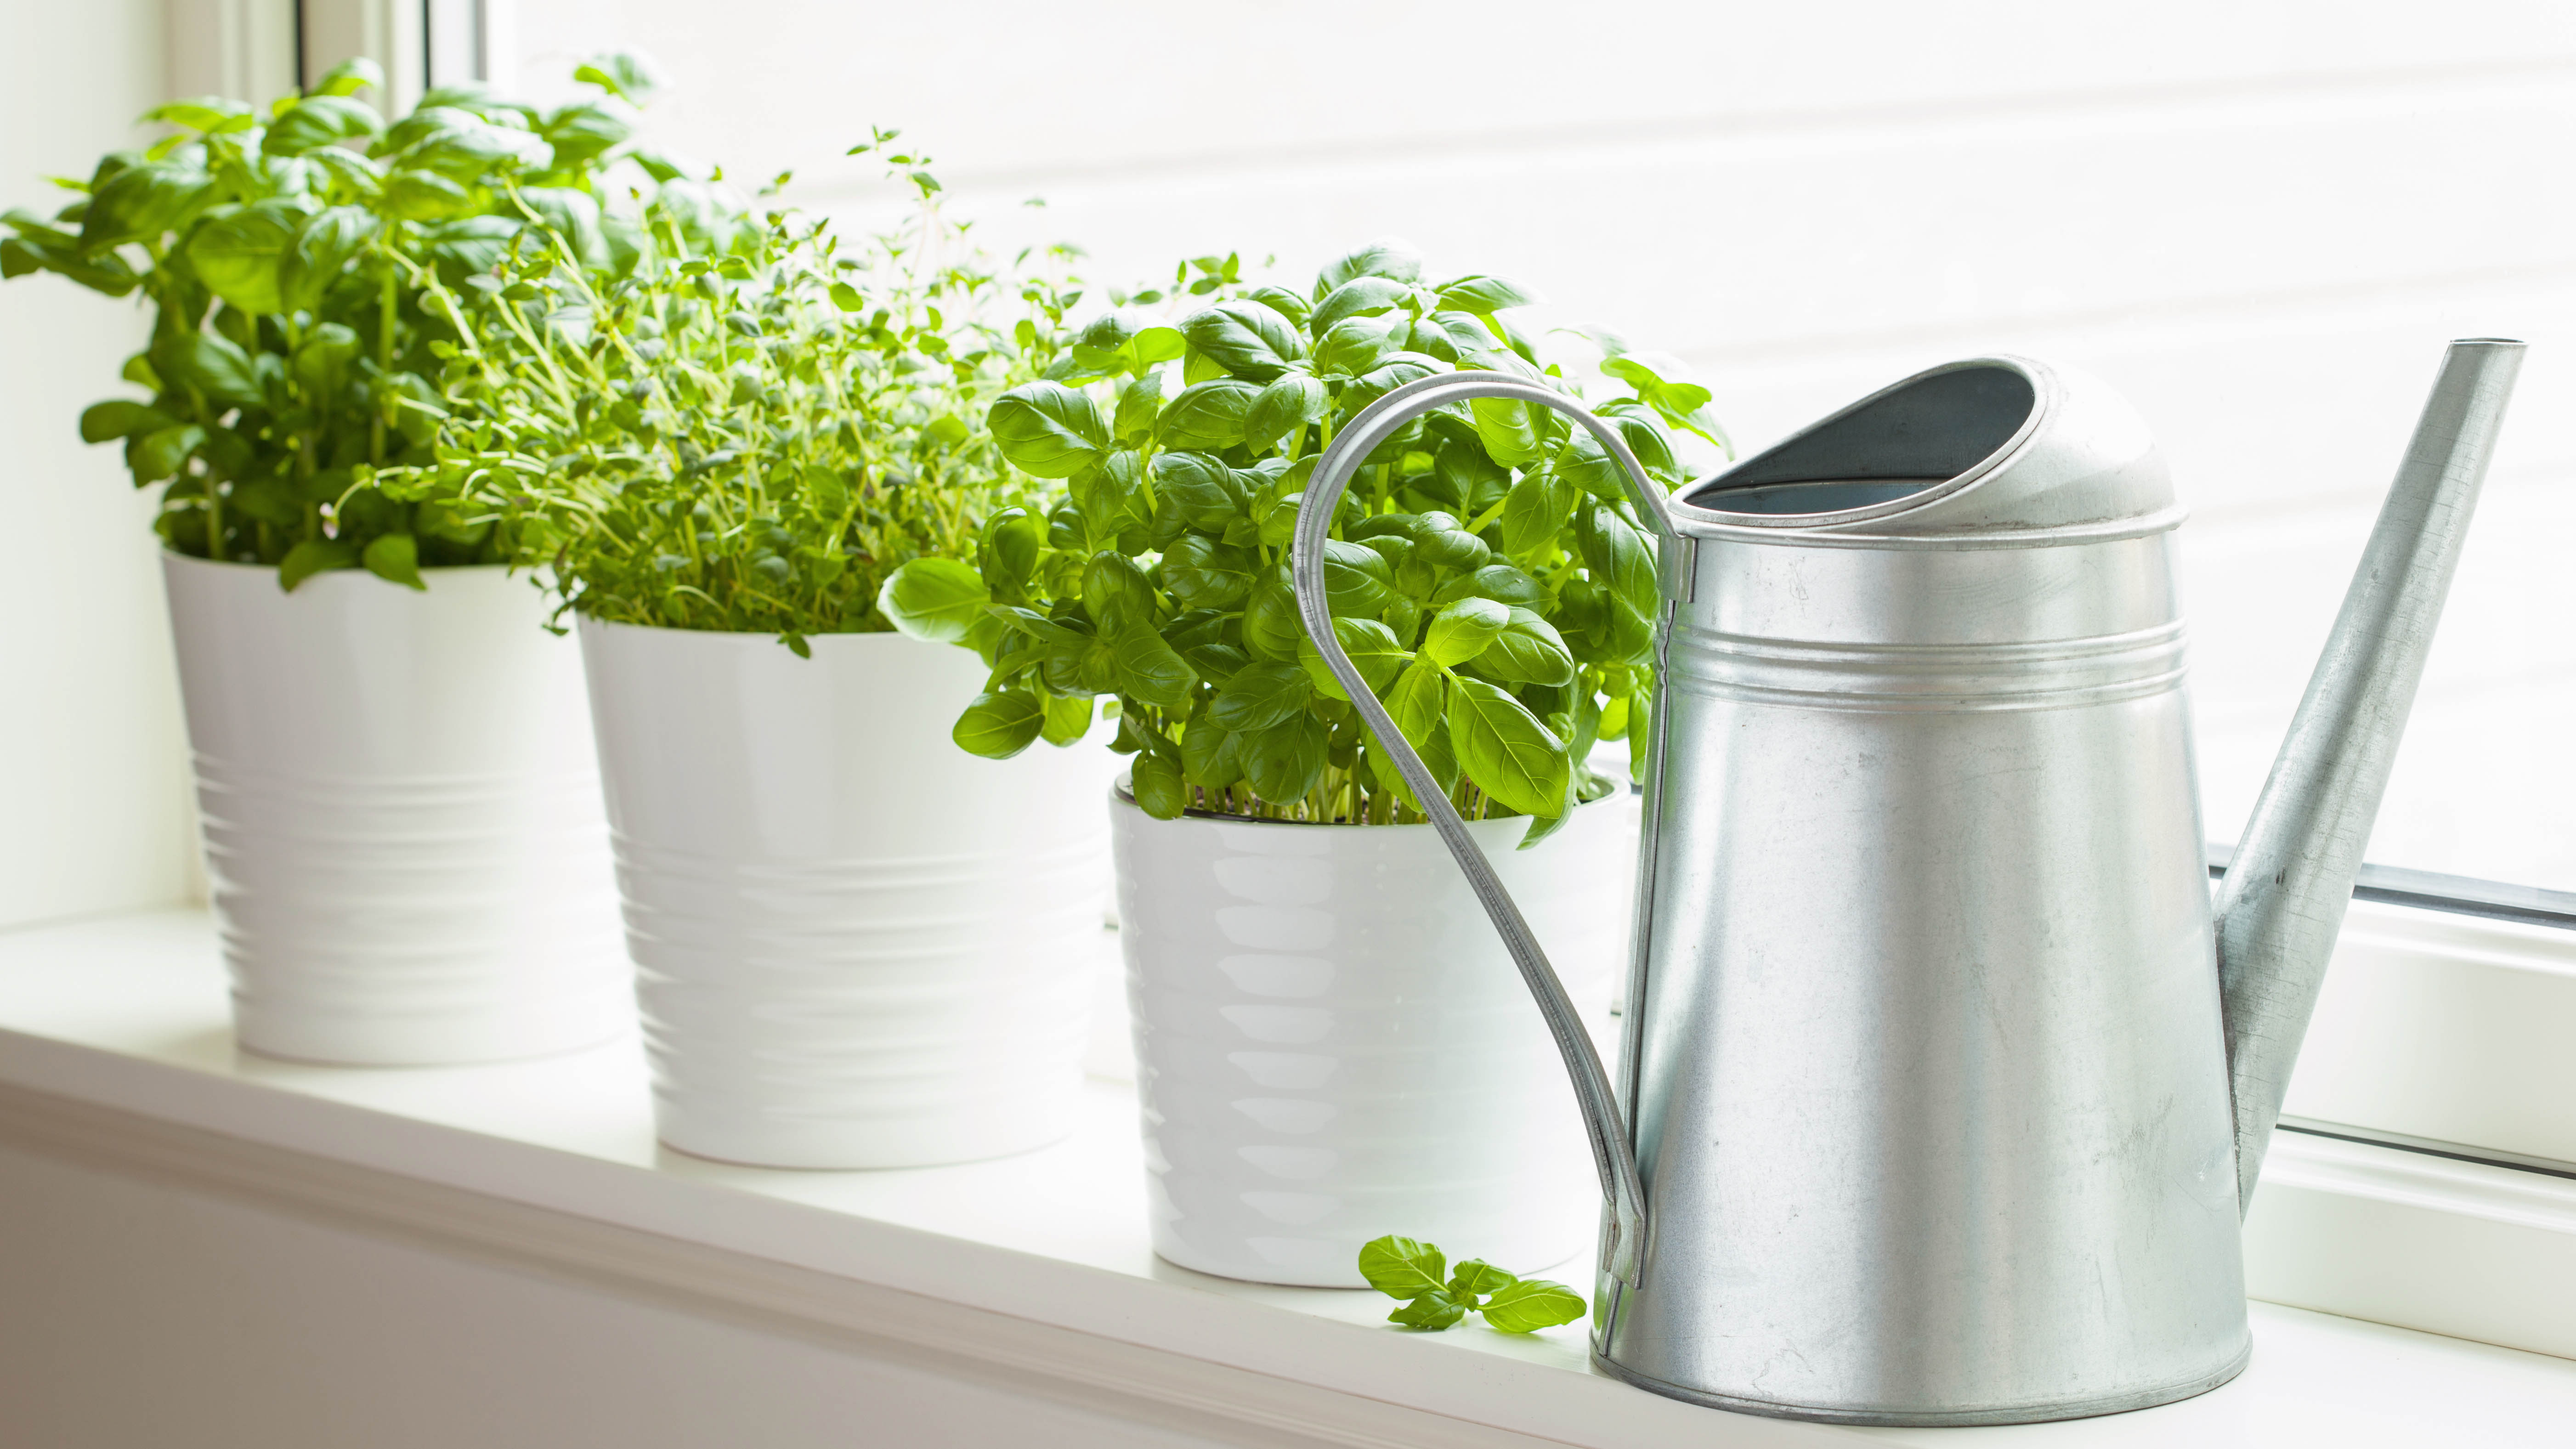 Three types of herb lined up on a windowsill next to a watering can